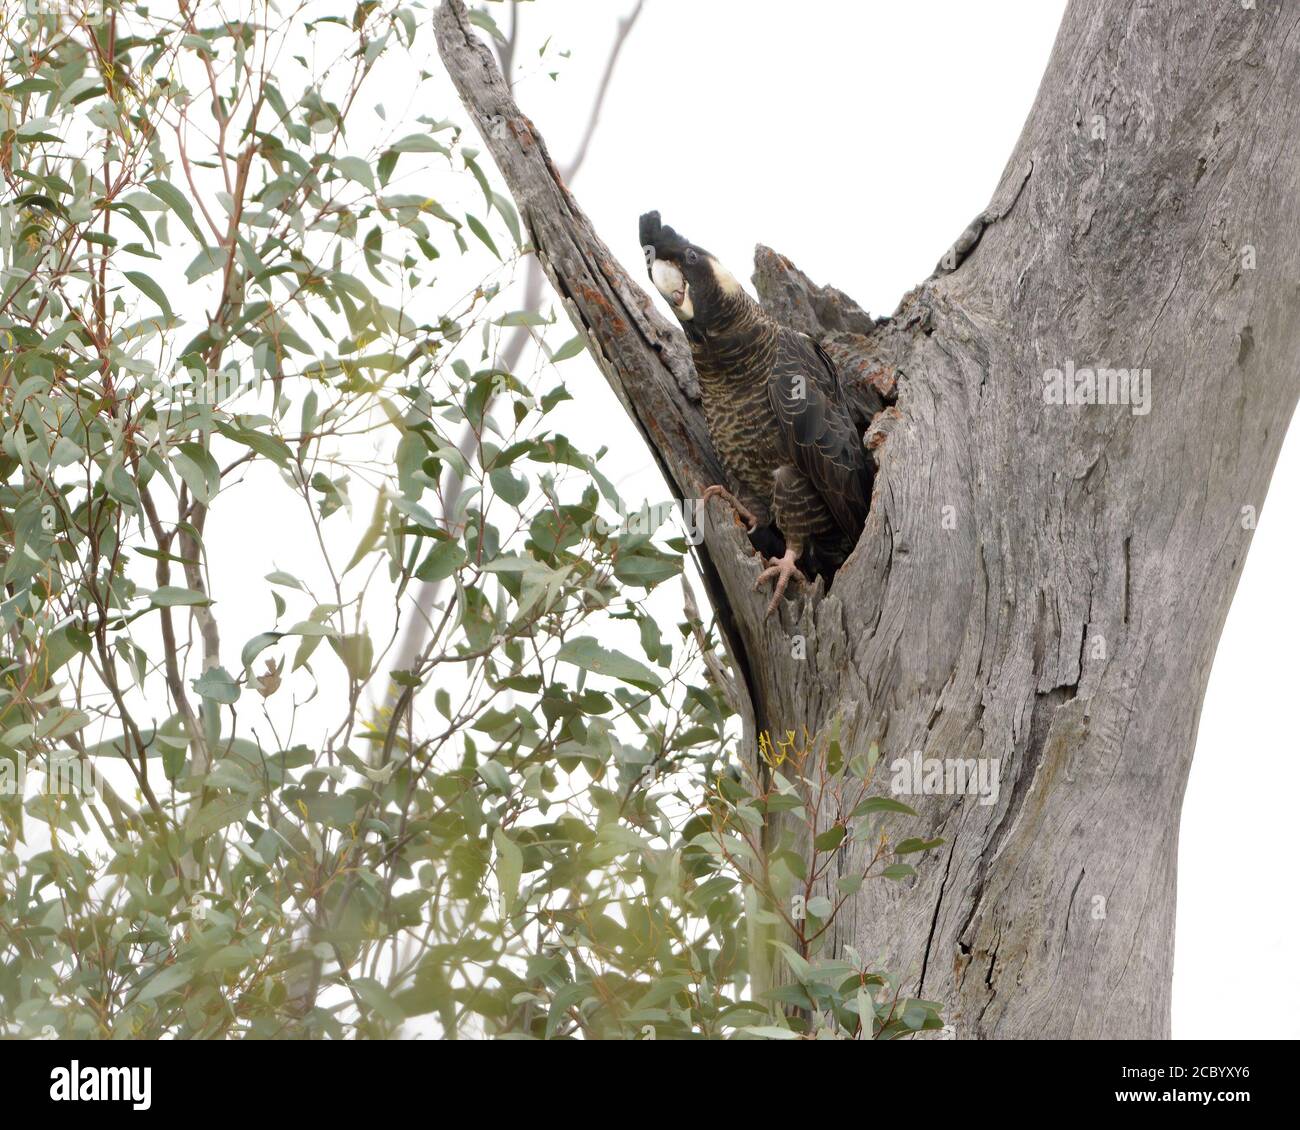 An endangered Carnaby's Black Cockatoo (Calyptorhynchus latirostris) comes out of a tree hollow near Perth, Western Australia Stock Photo